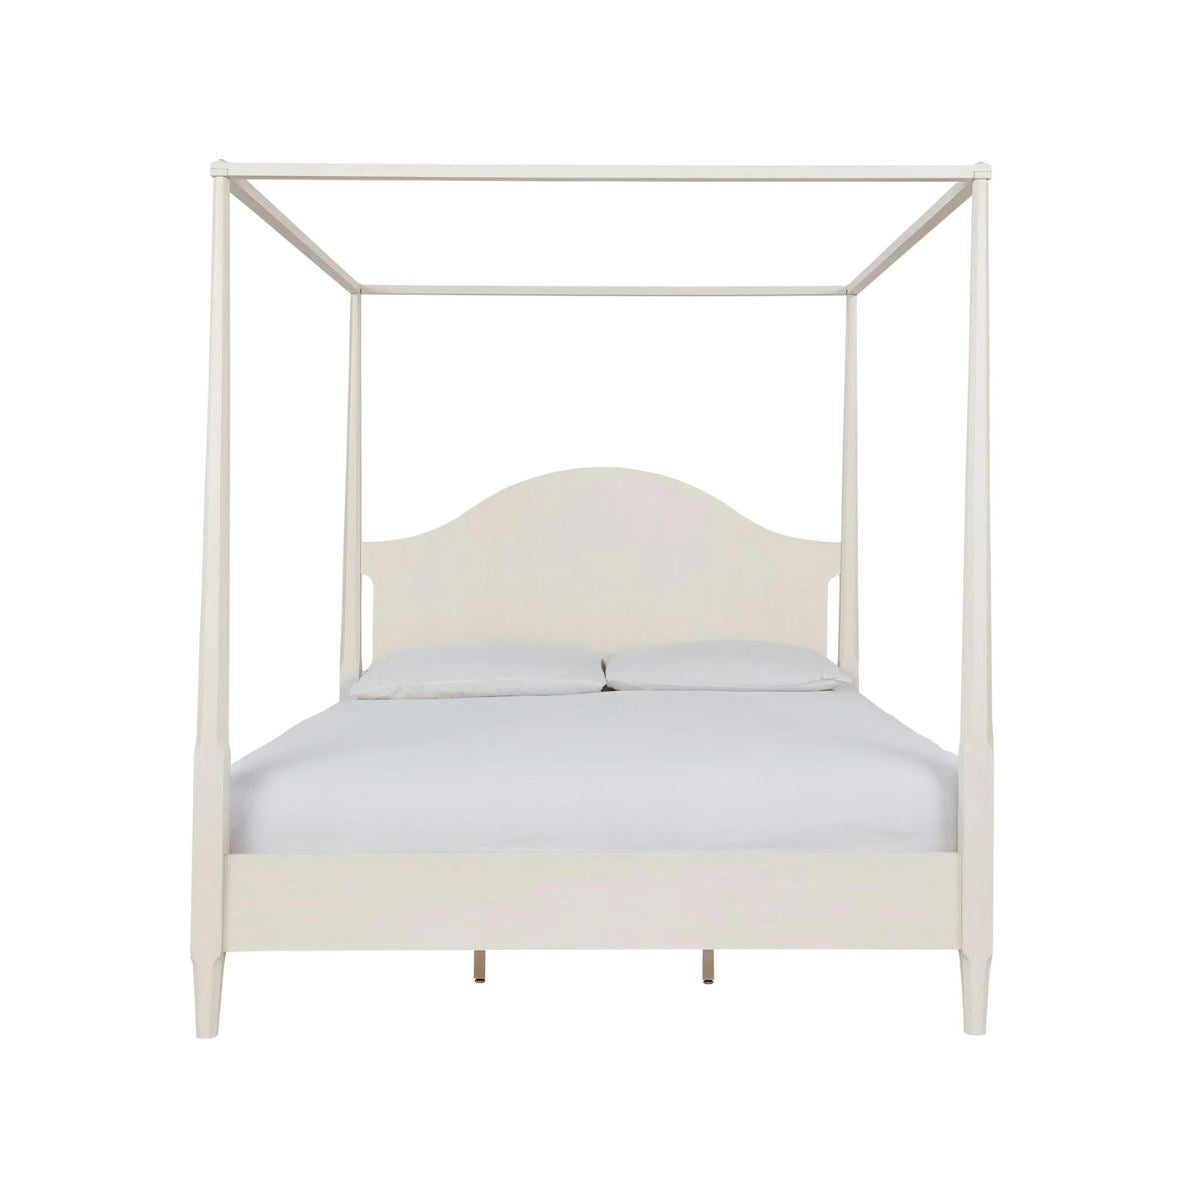 Madison Bed Frame - Queen. Front view.